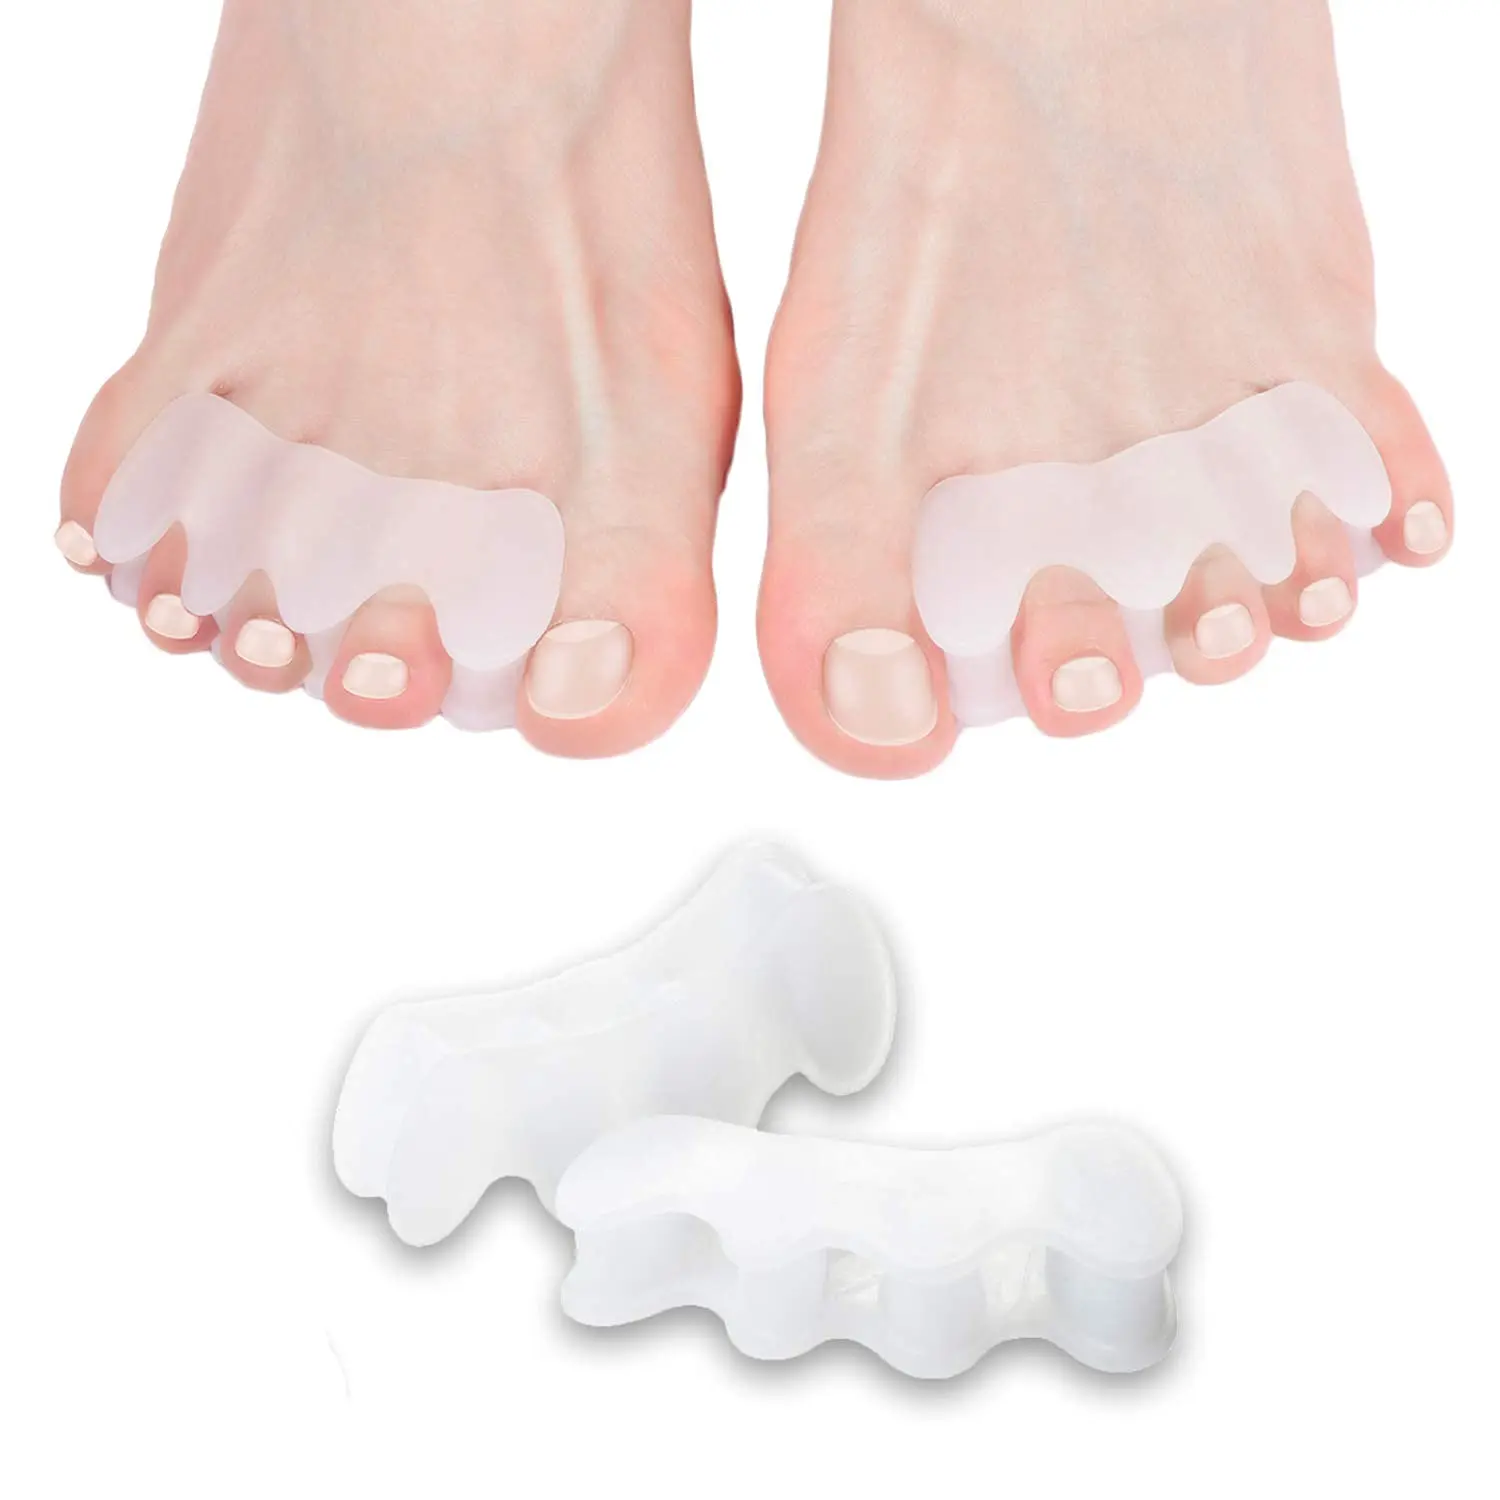 

Sdotter 1/2Pair Toe Separators to Correct Bunions and Restore Toes to Their Original Shape,Straightener Toe Stretcher Big Toe Co